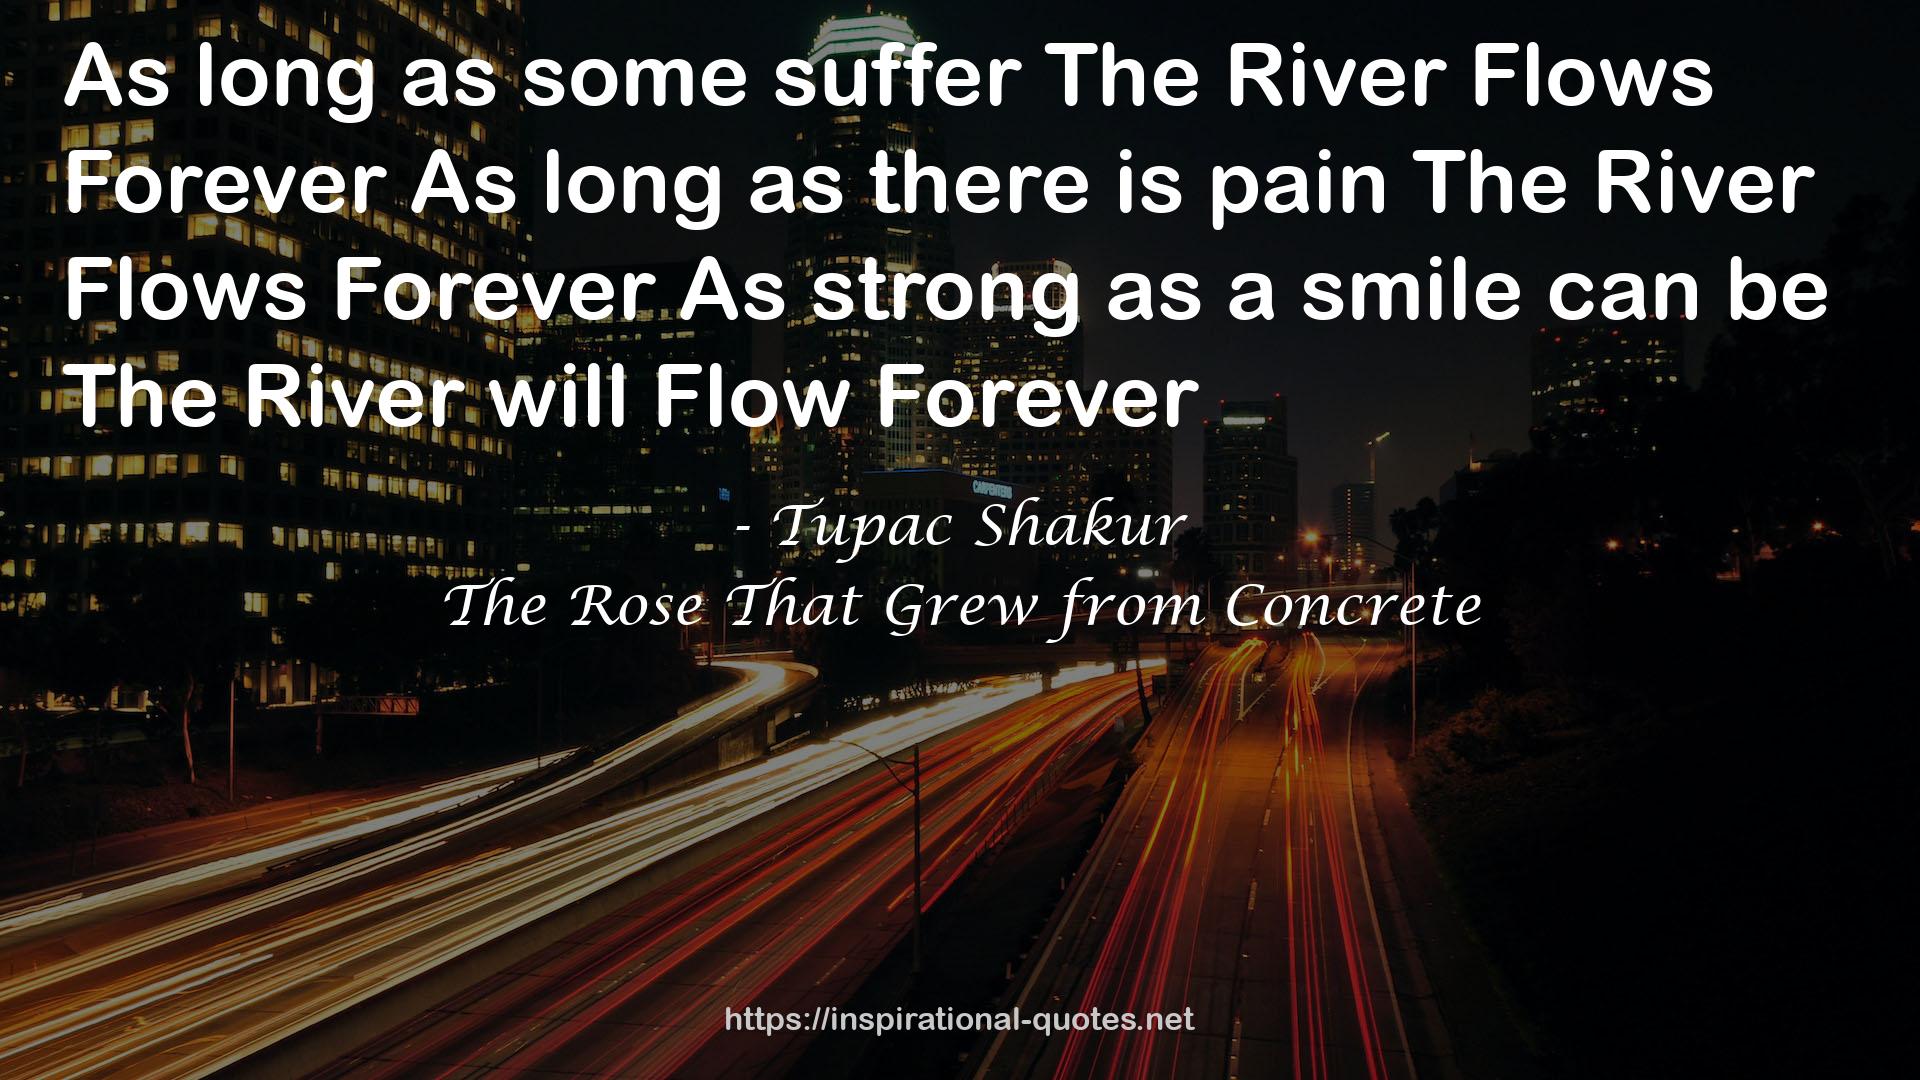 painThe River Flows ForeverAs  QUOTES